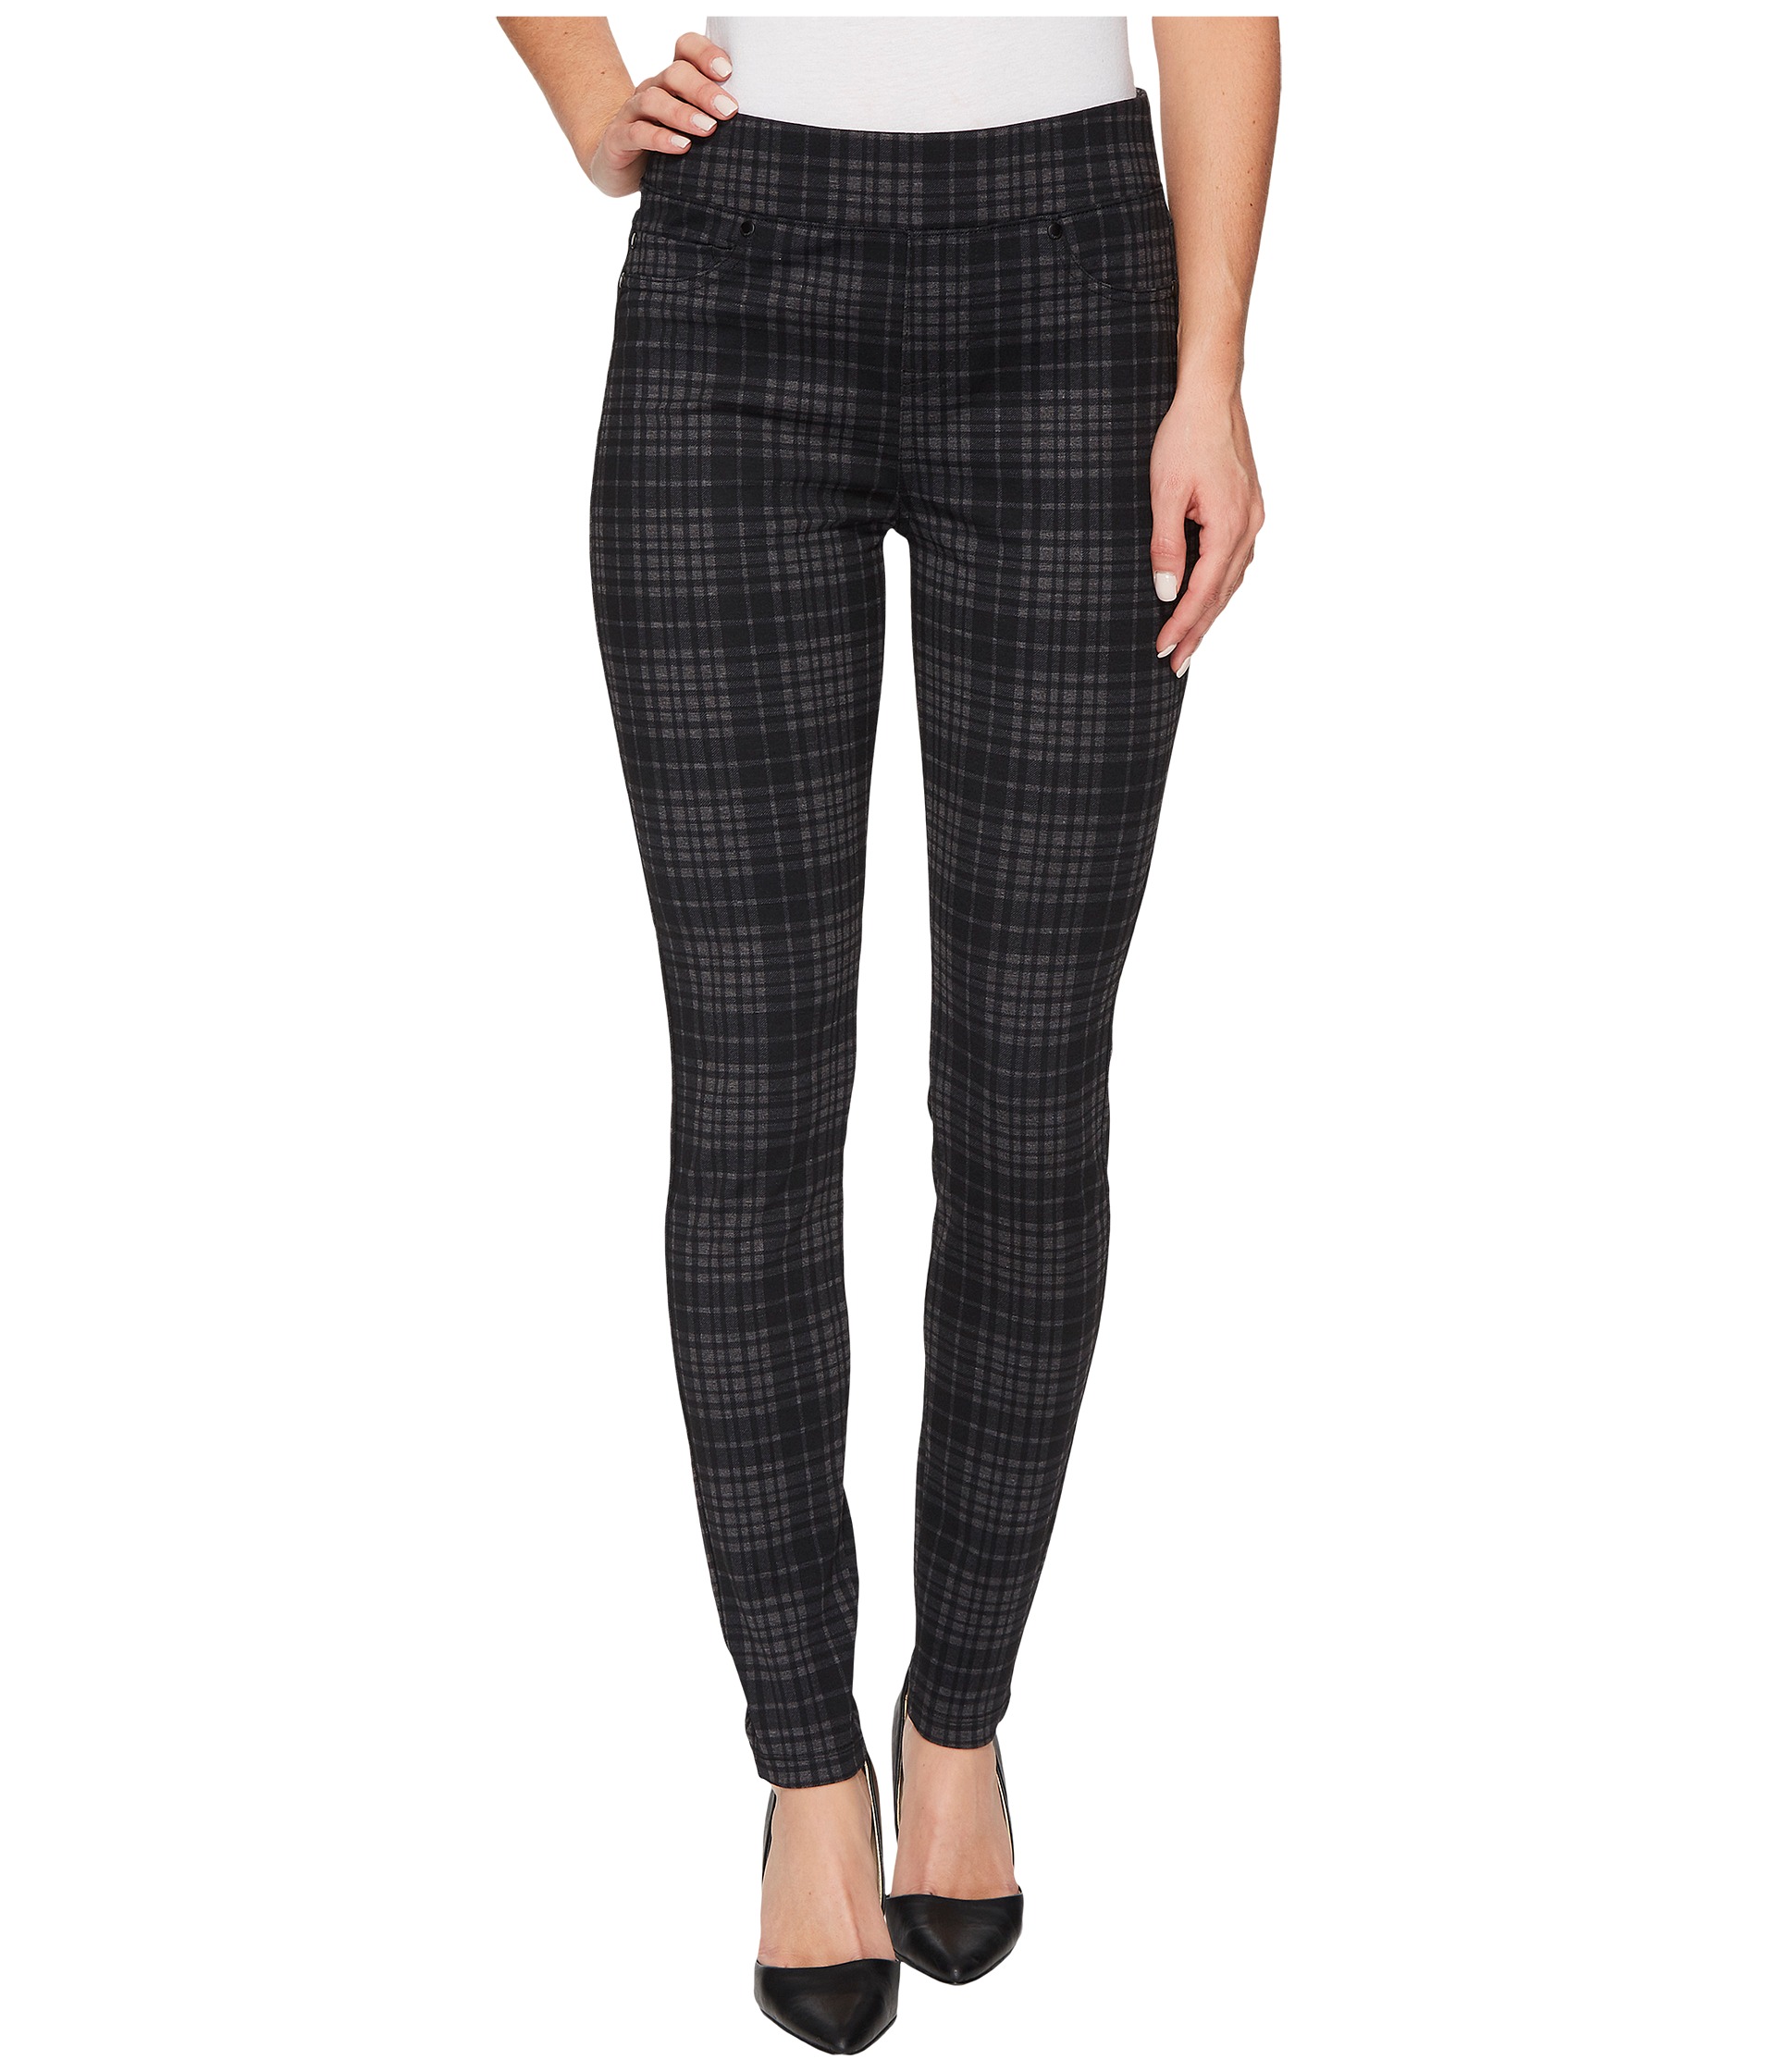 Liverpool Sienna Pull-On Leggings in Heather Plaid Soft Ponte Knit in ...